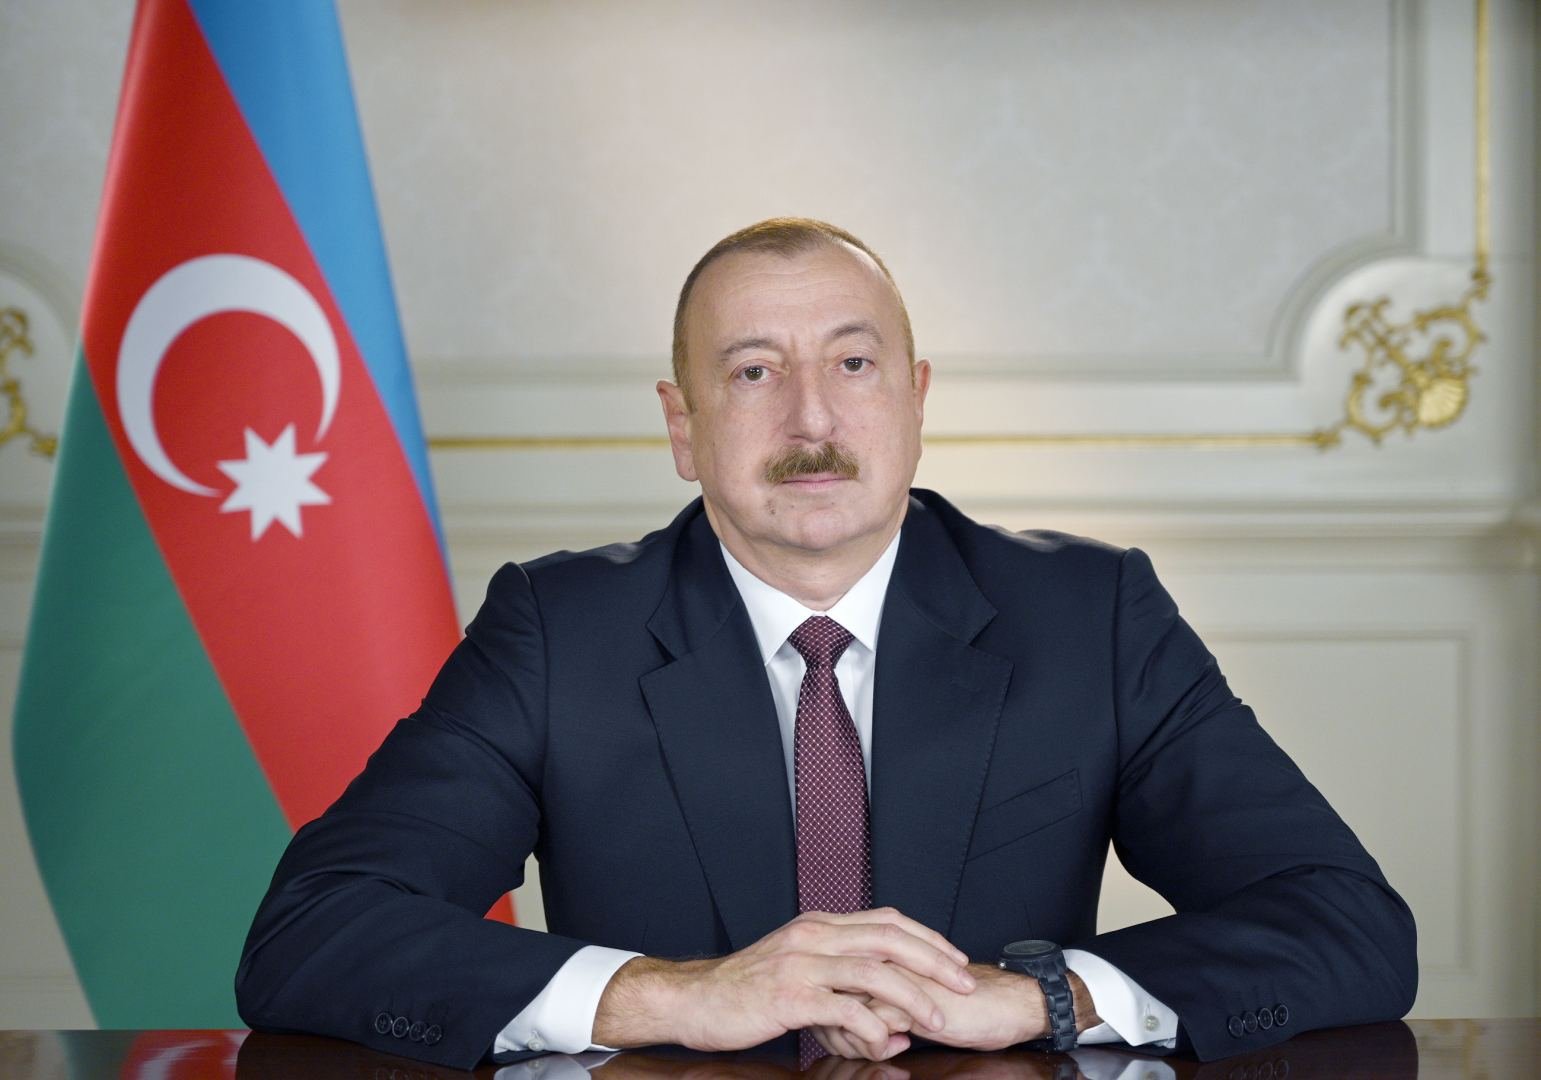 As result of anti-terrorist measures, most of enemy's weapons and equipment have been incapacitated - President Ilham Aliyev